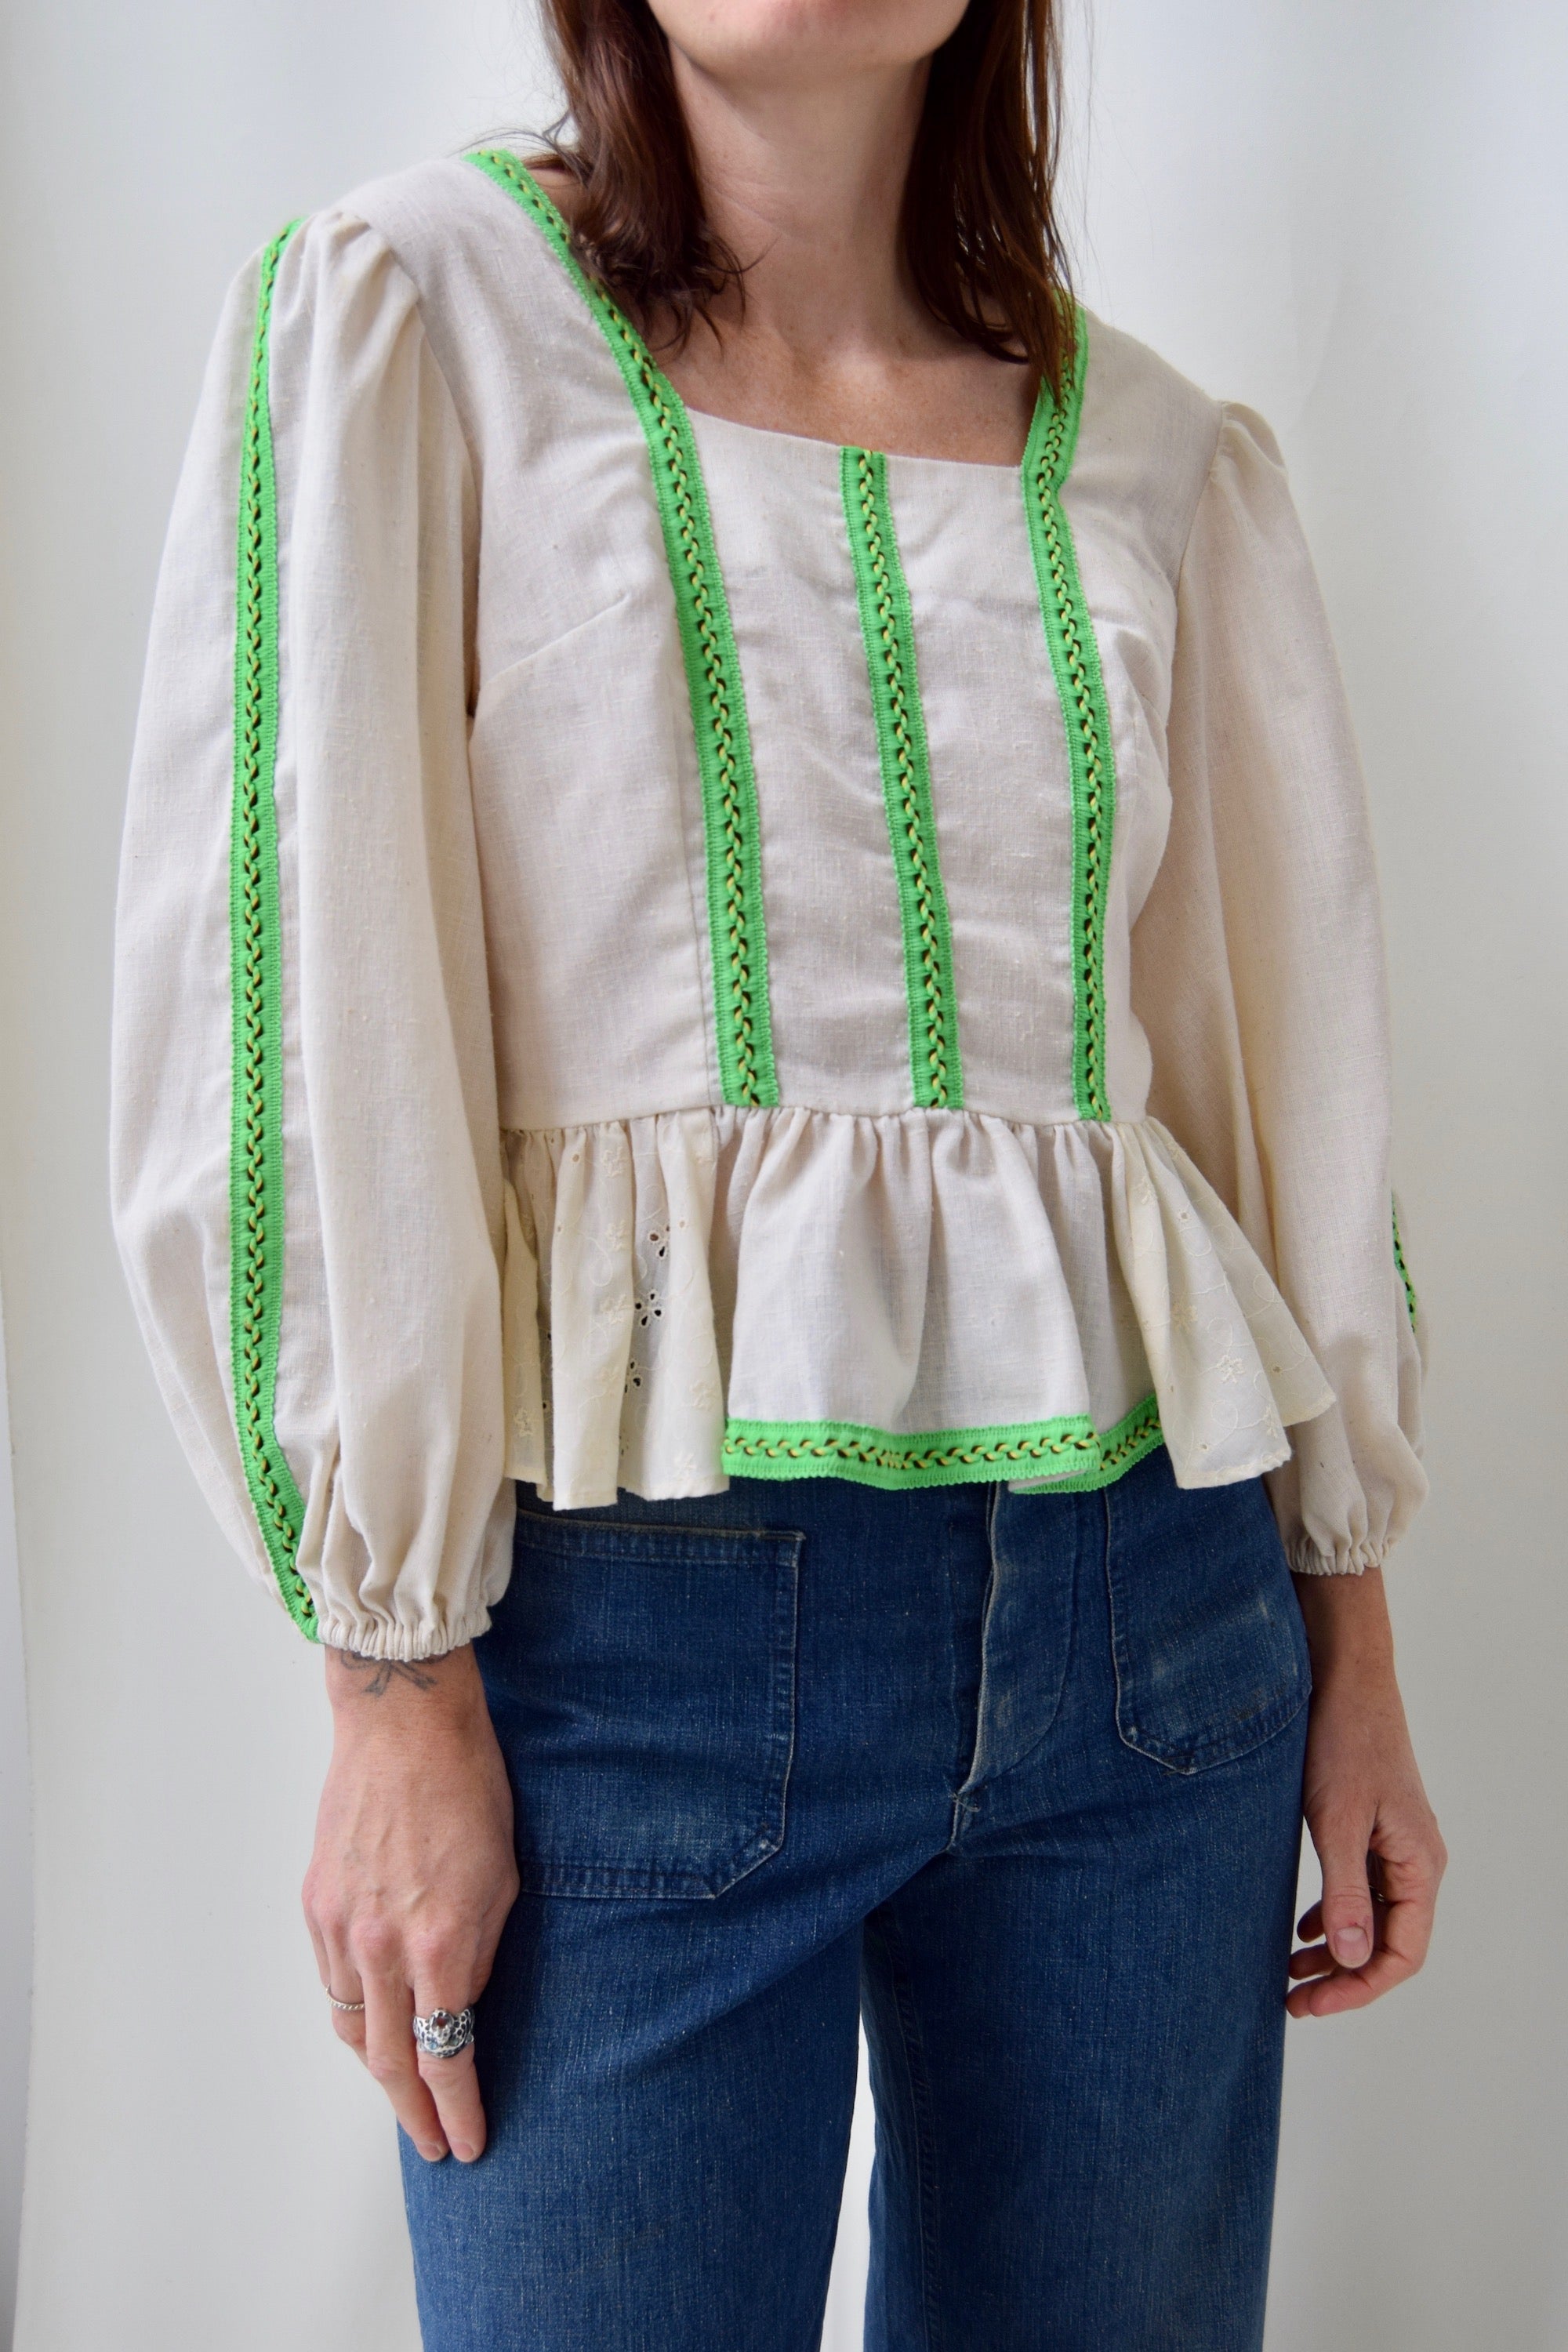 1970's Neon Green Braided Top